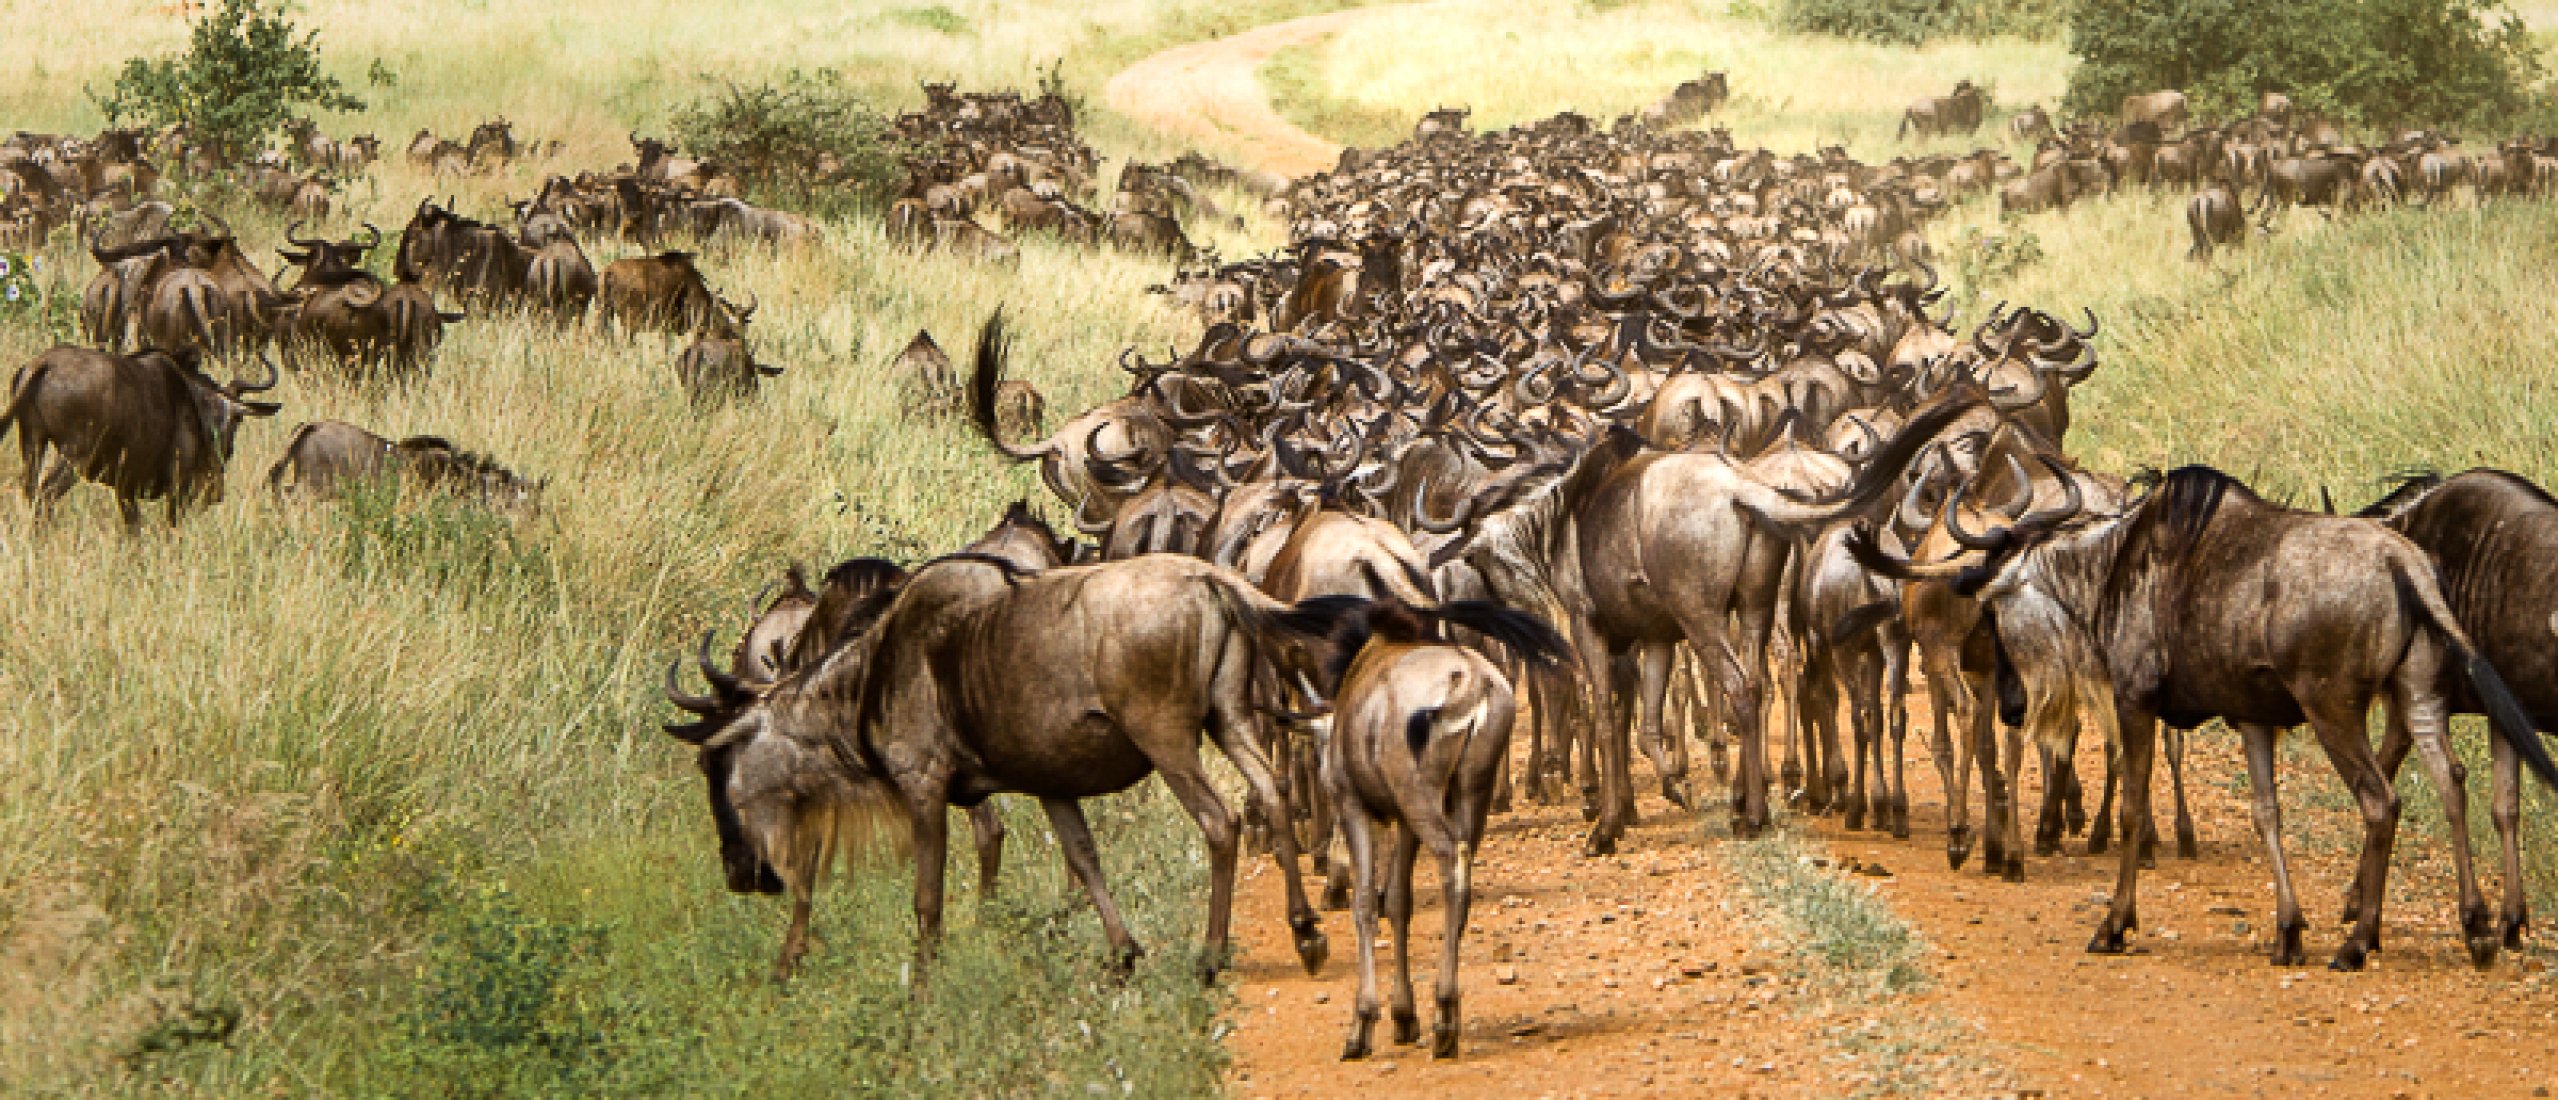 What is The Great Migration? | Safari in East Africa